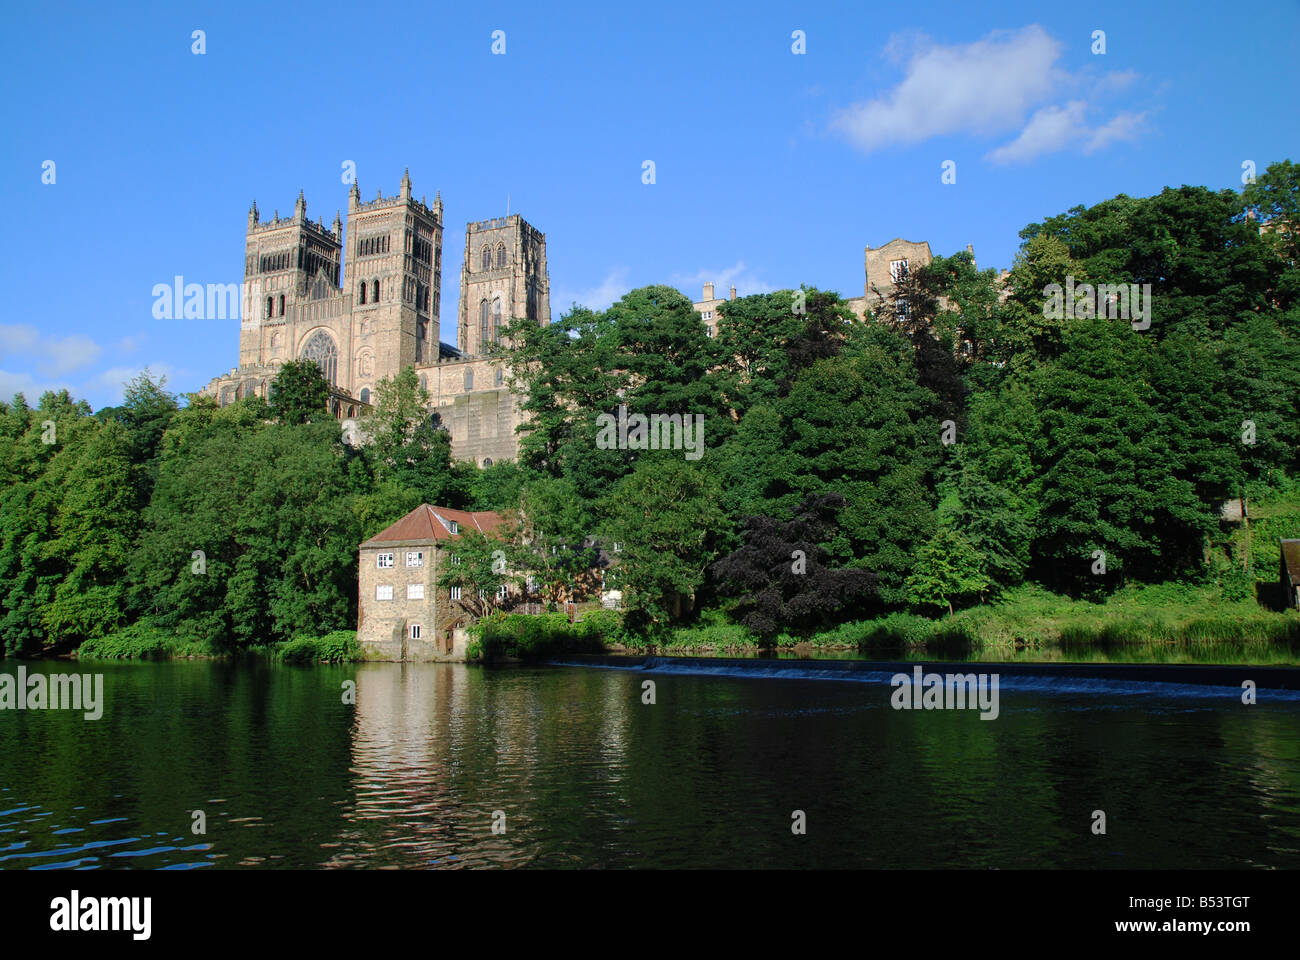 Durham Cathedral seen from across the river Stock Photo